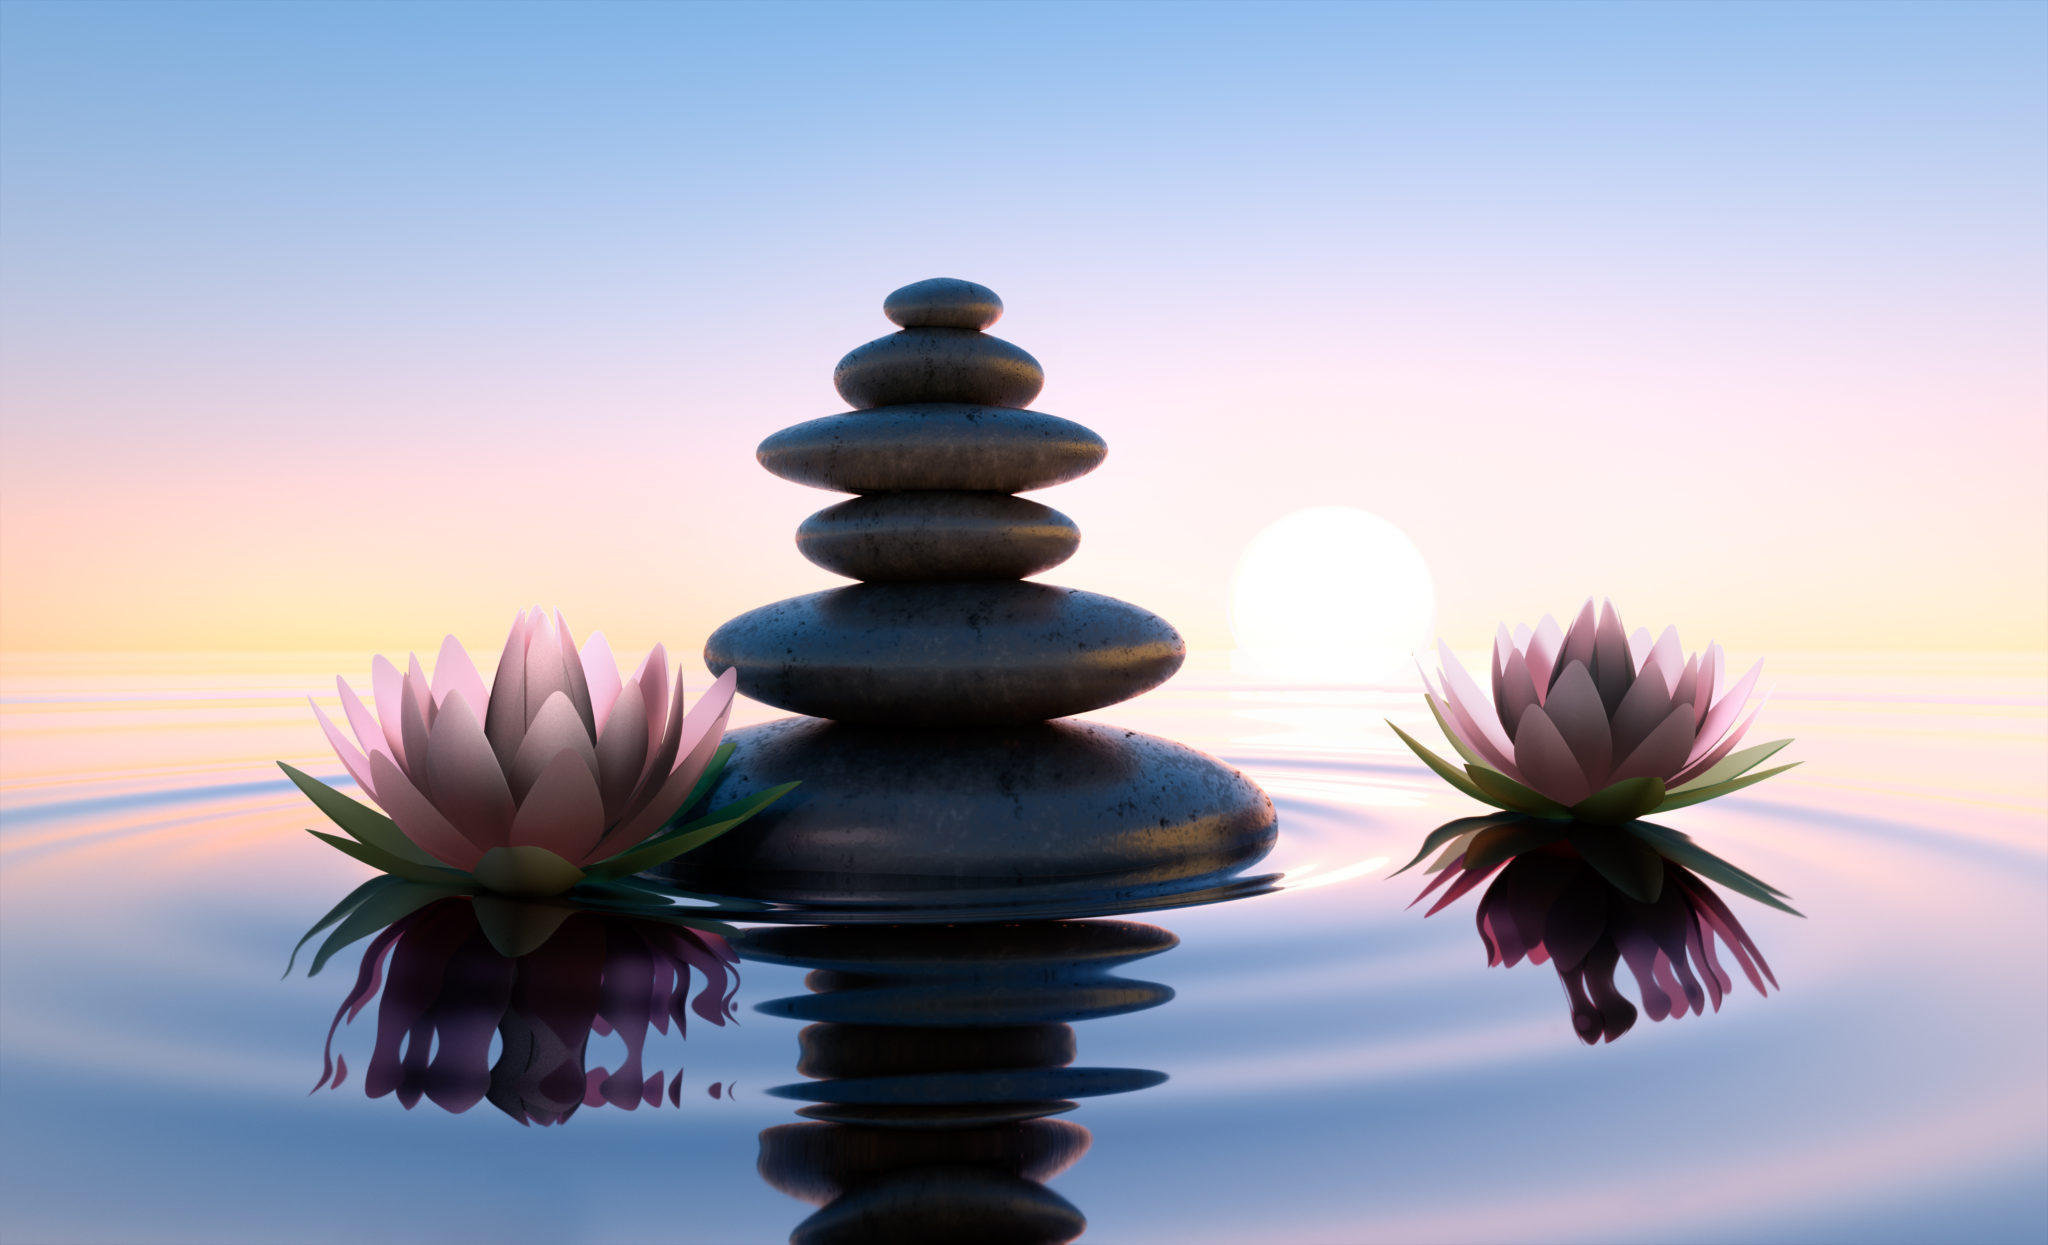 Stack of smooth pebbles on rippling water with two lotus flowers